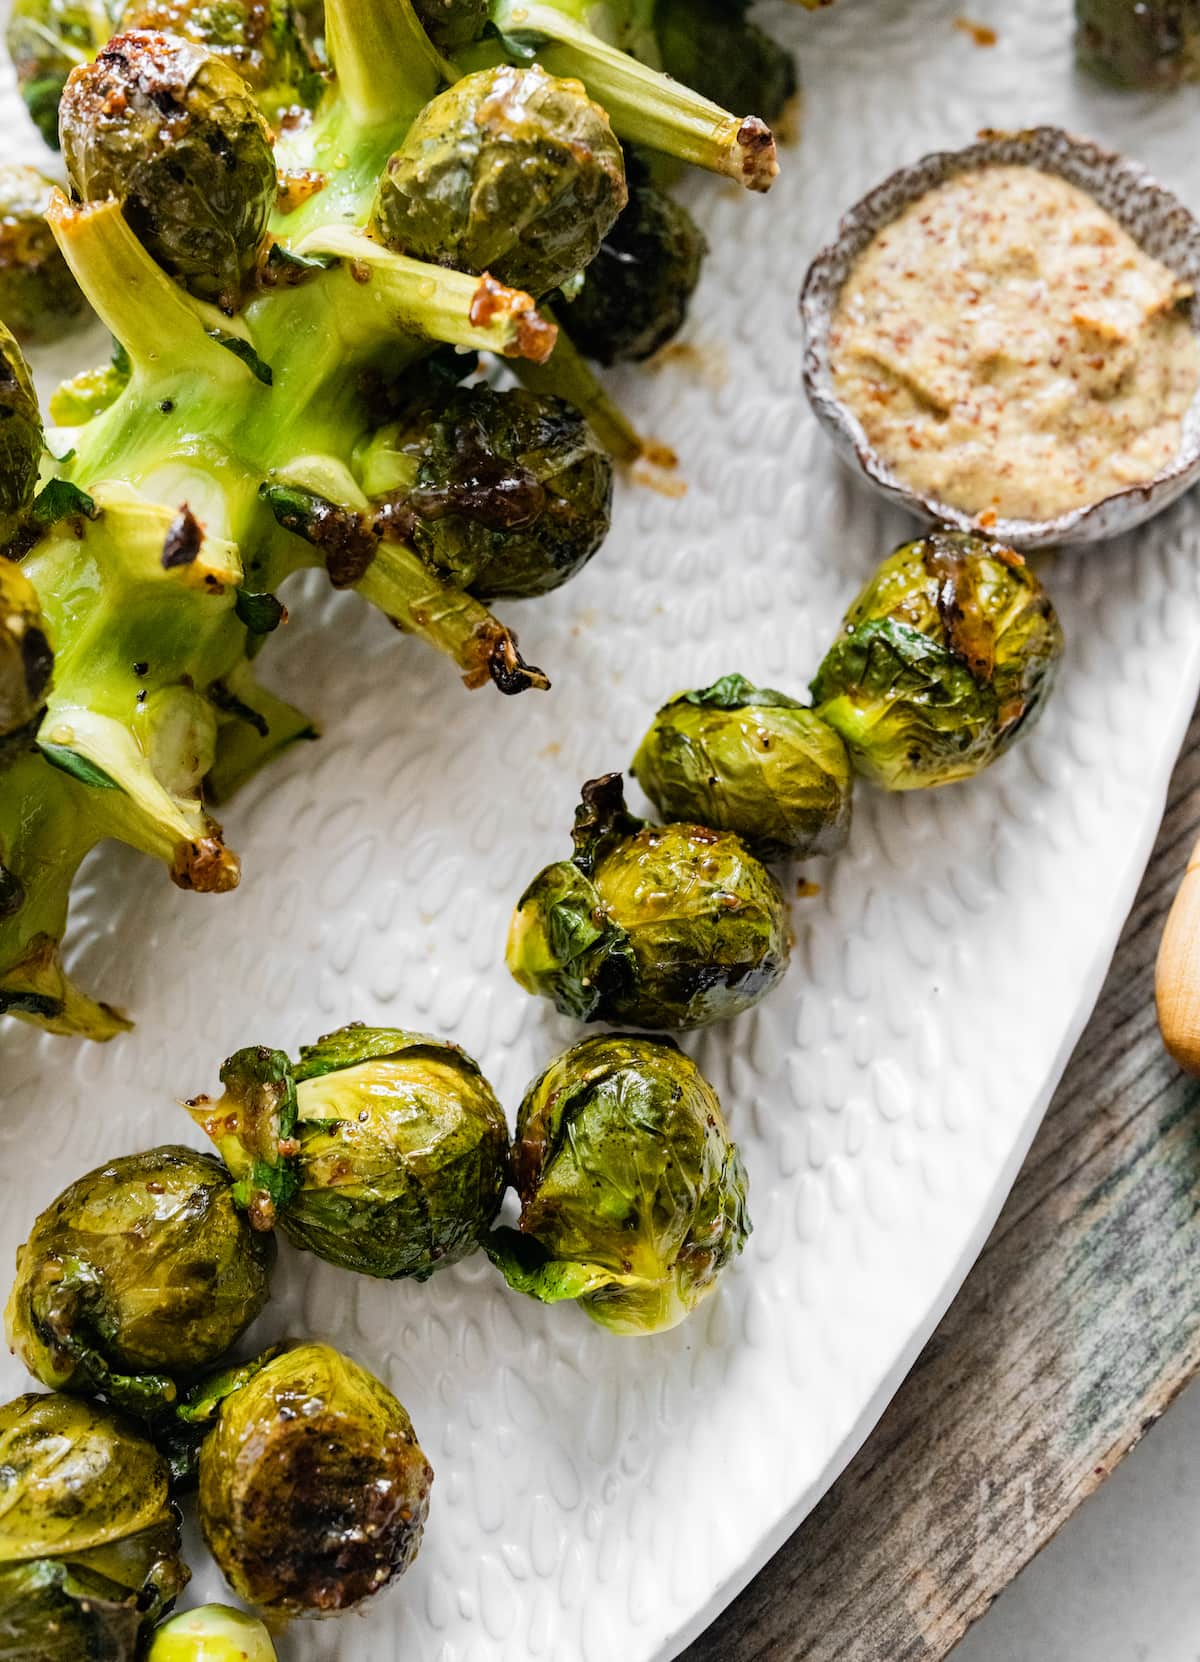 Roasted brussels sprouts on a plate near a small bowl of mustard.